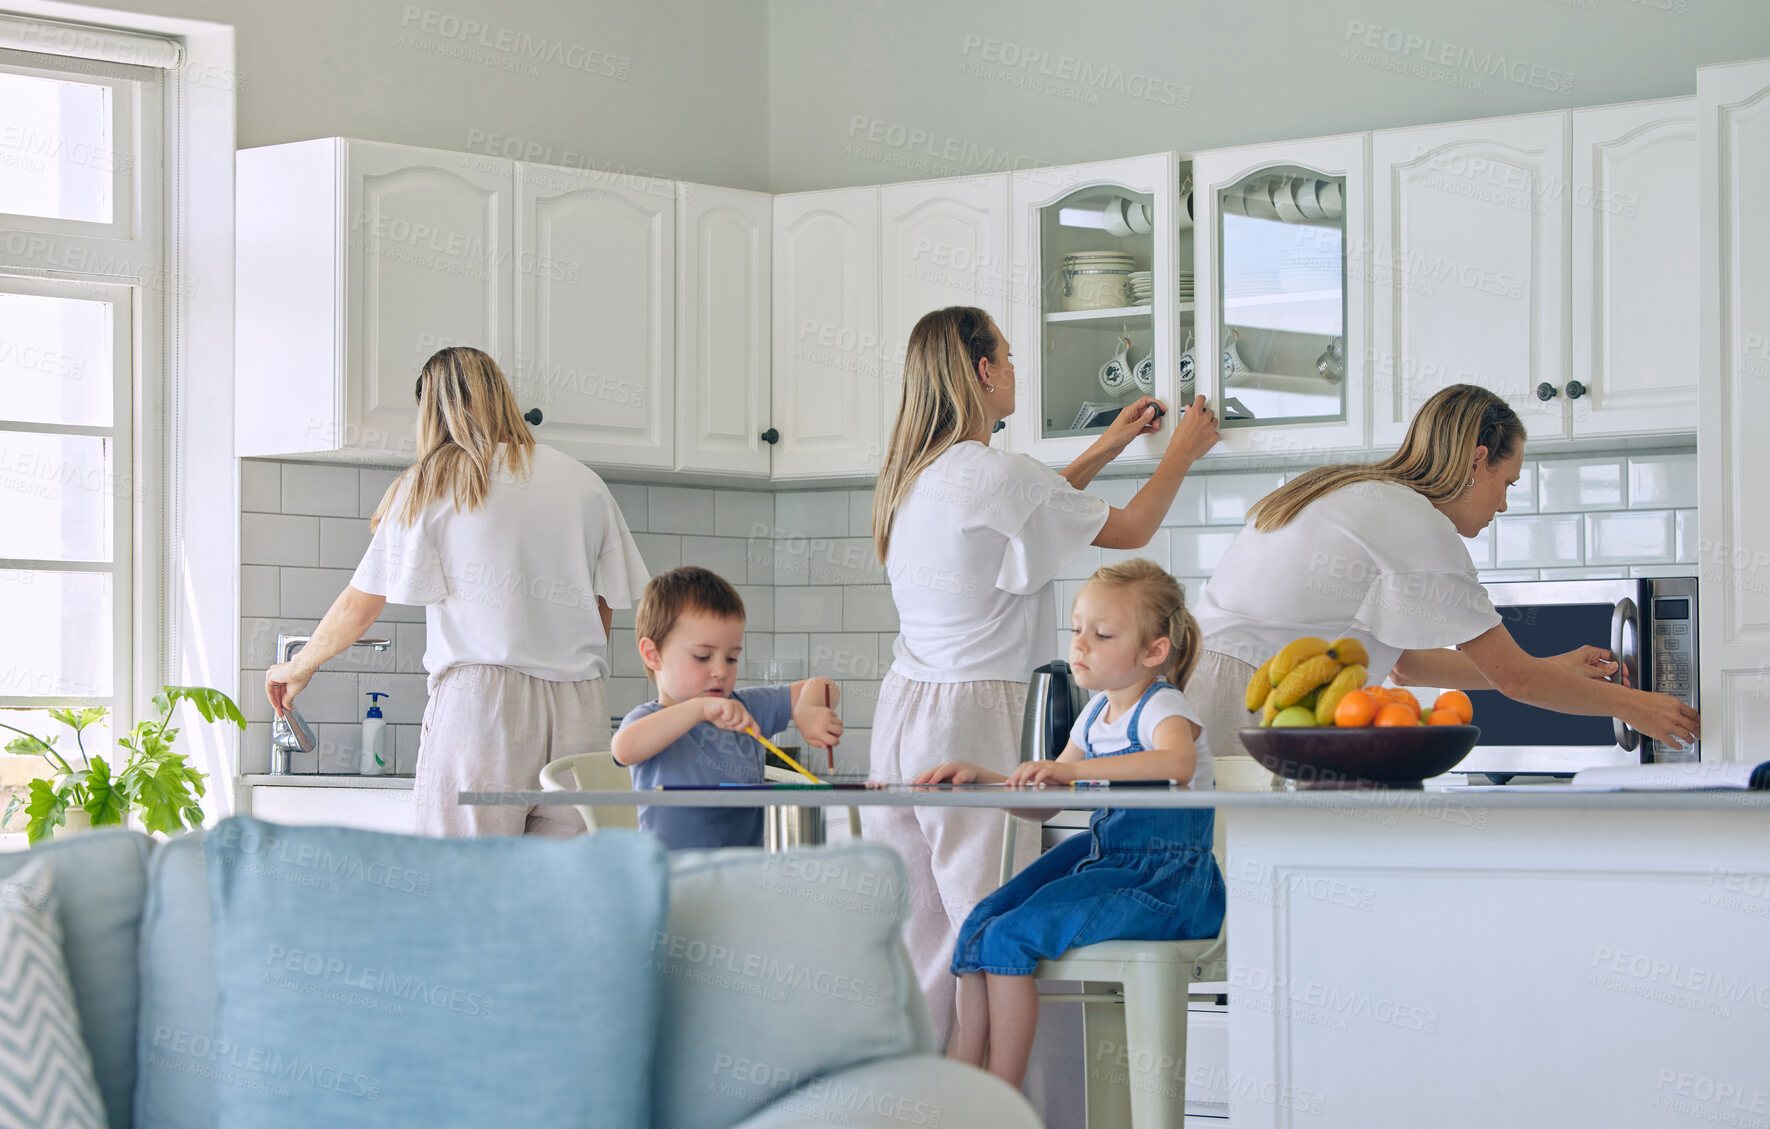 Buy stock photo Busy mom feeding kids and cleaning the house. Little girl and boy sitting and eating in the kitchen while mother does chores. Stay-at-home mother multitasking and being a super mom